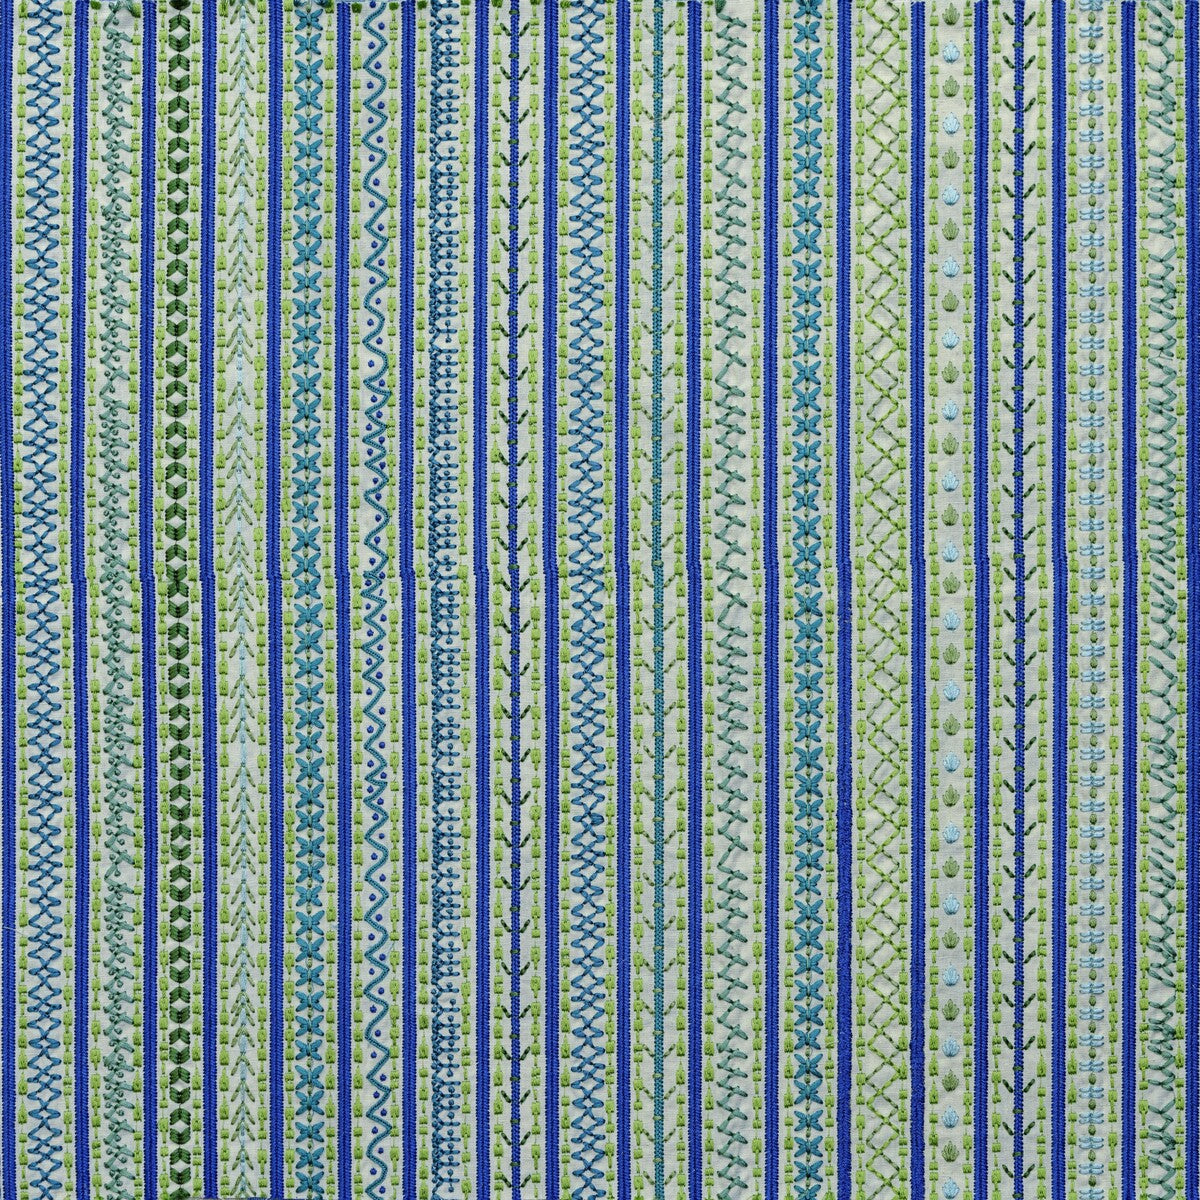 Capri fabric in blue/green color - pattern BFC-3680.530.0 - by Lee Jofa in the Blithfield collection